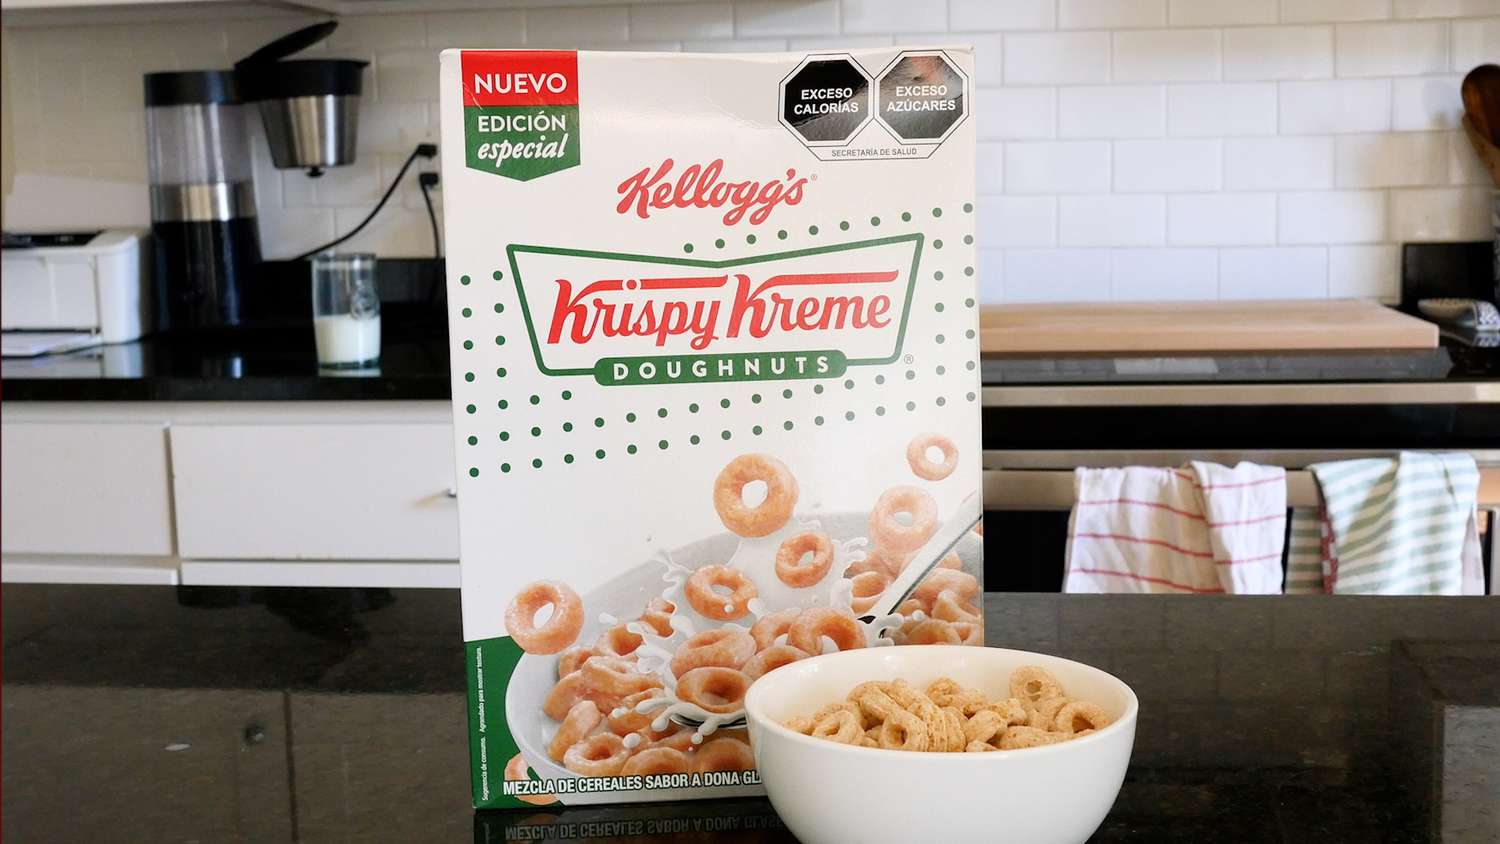 Box of Krispy Kreme cereal next to a bowl of the cereal